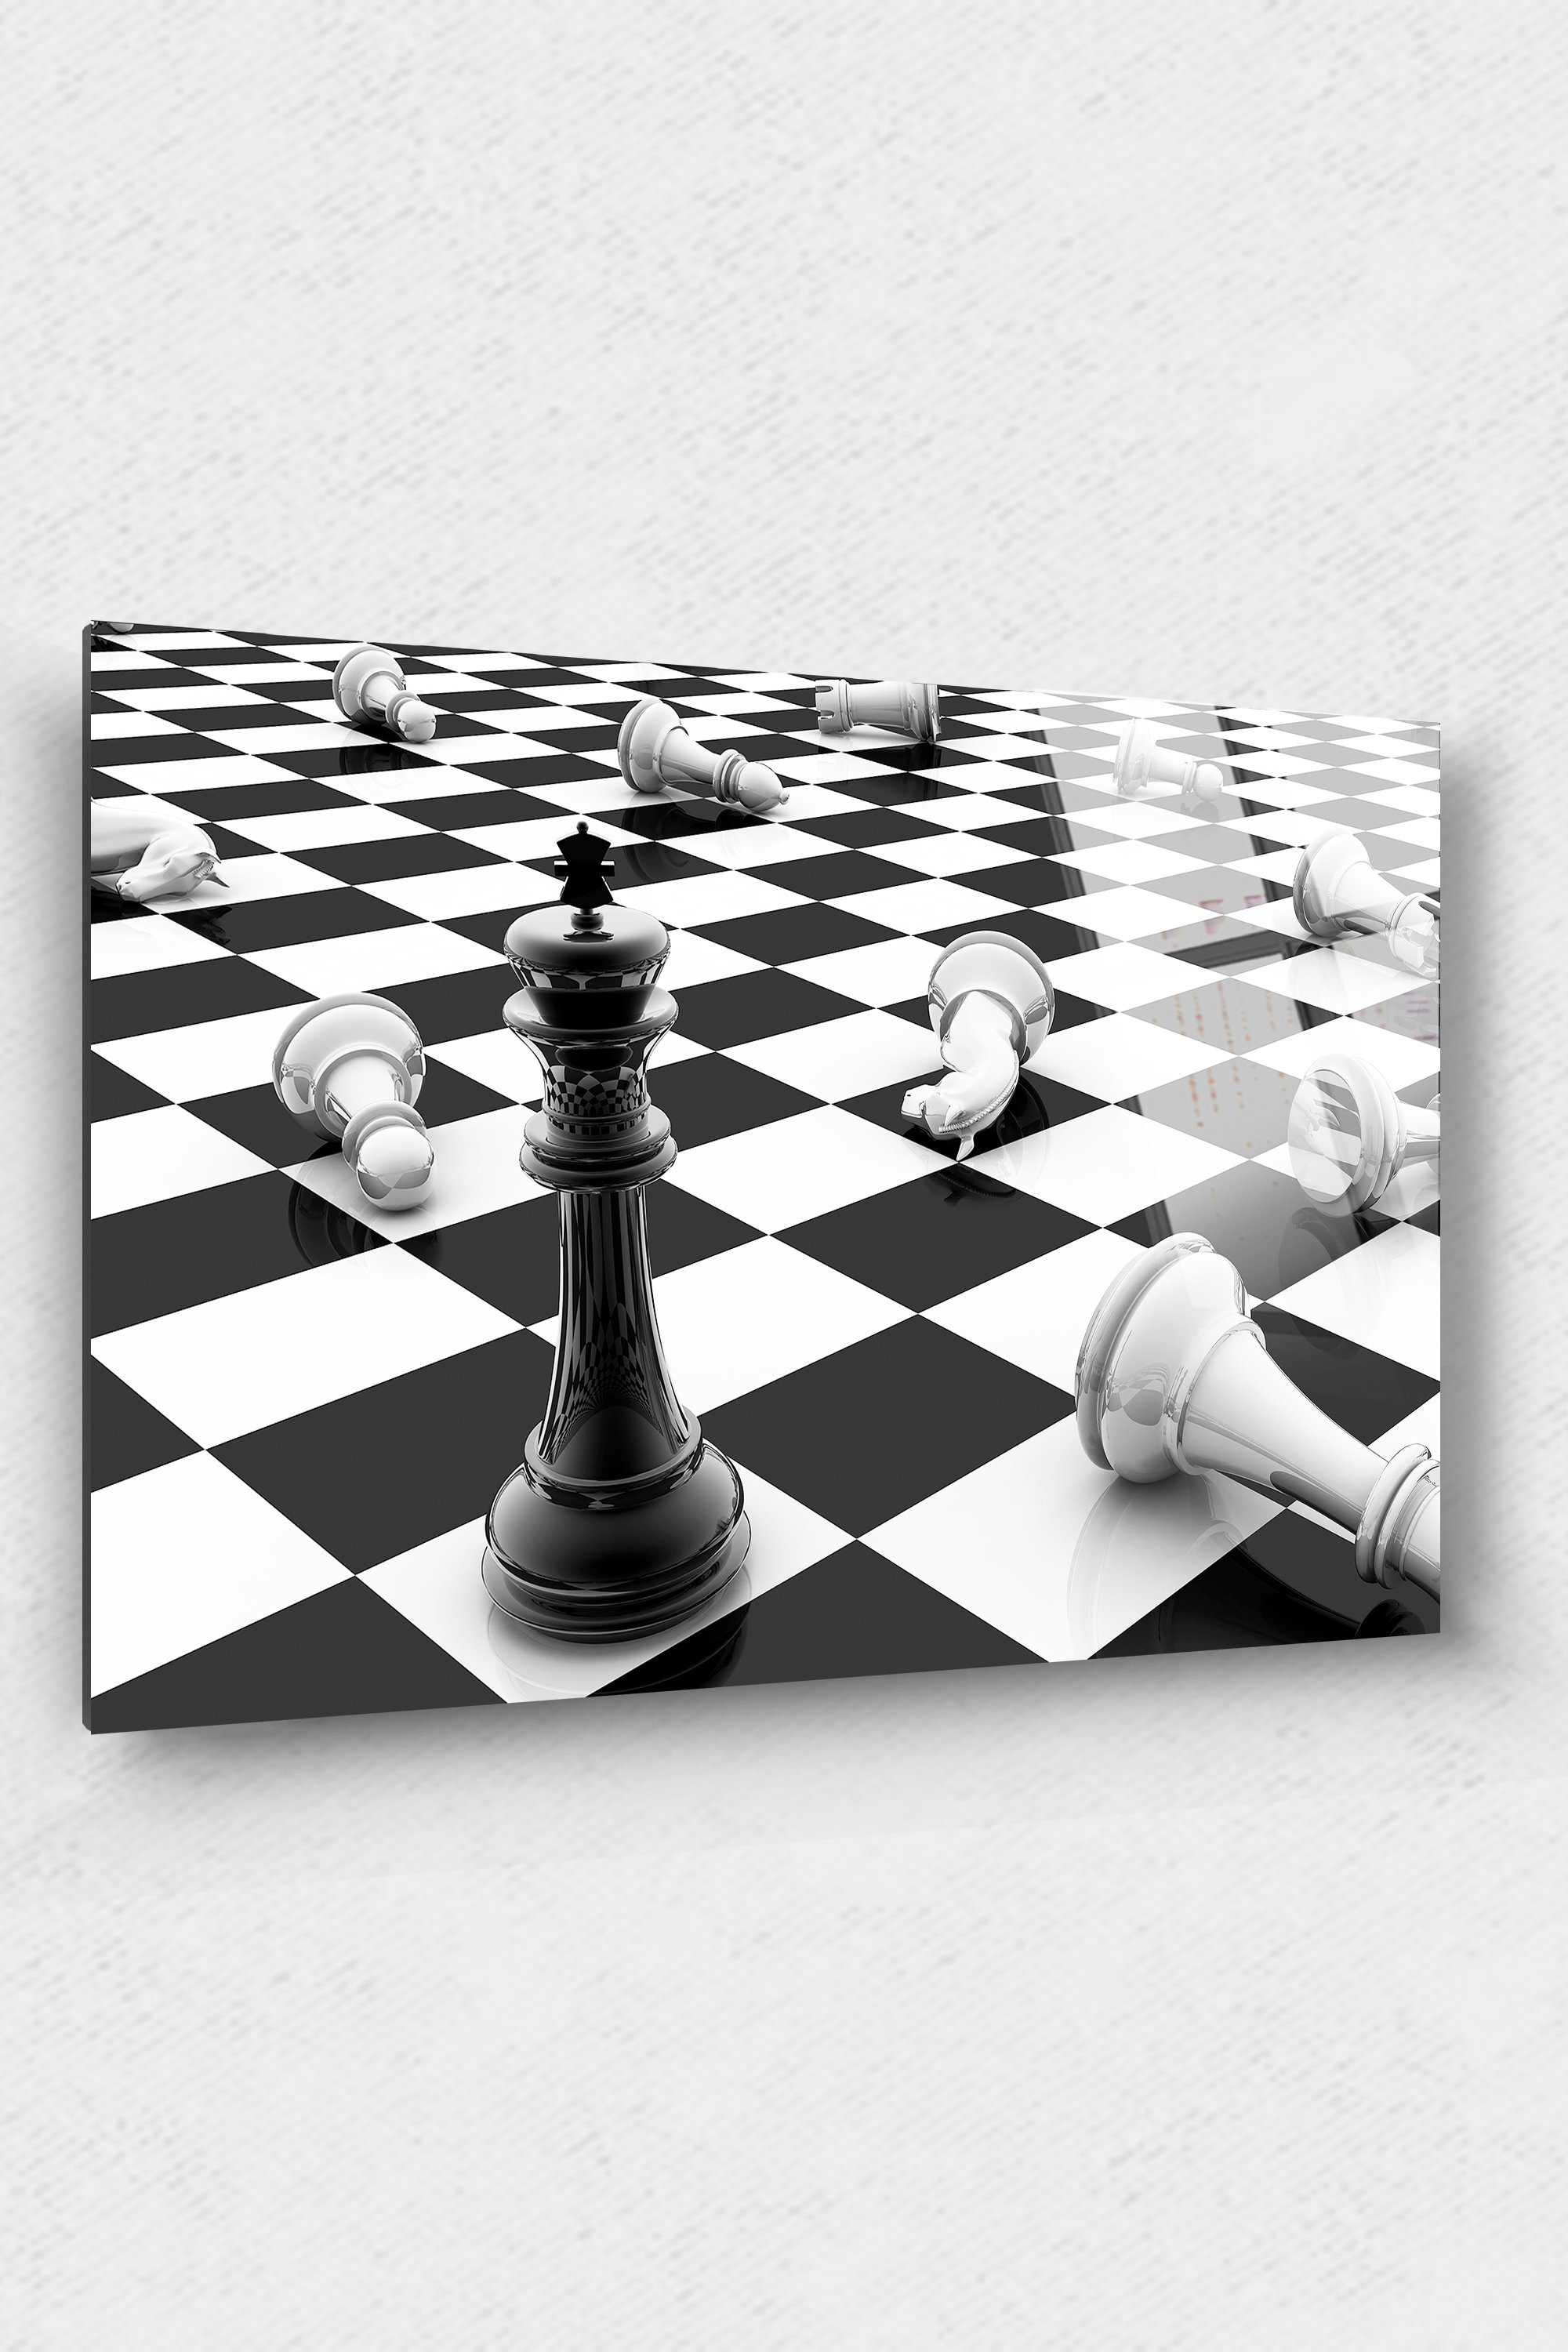 Chess The French Defence Minimalistic book cover chess opening art. Framed  Art Print for Sale by Jorn van Hezik